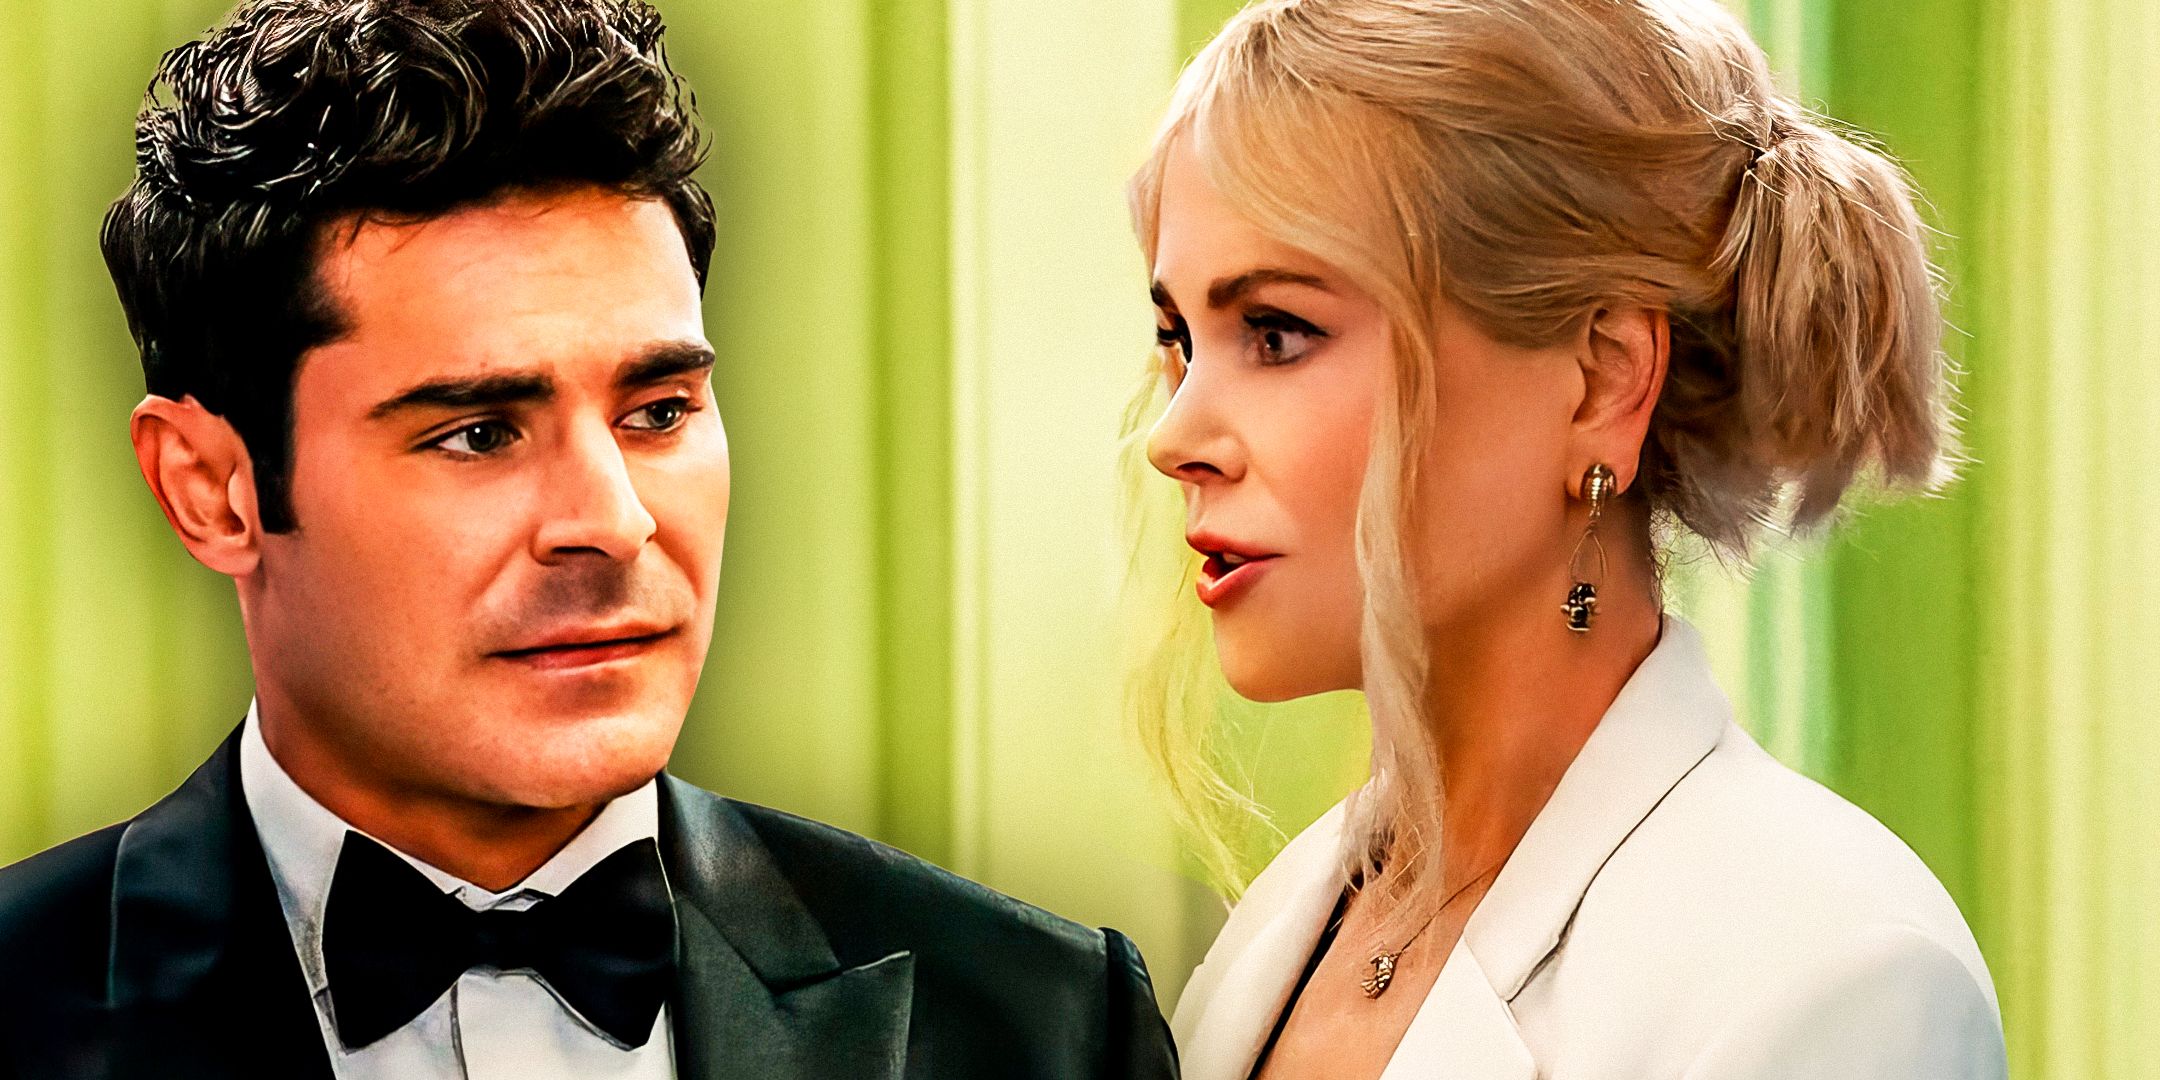 Zac Efron & Nicole Kidman's New Movie Can Make Up For 45% Rotten Tomatoes Flop From 12 Years Ago